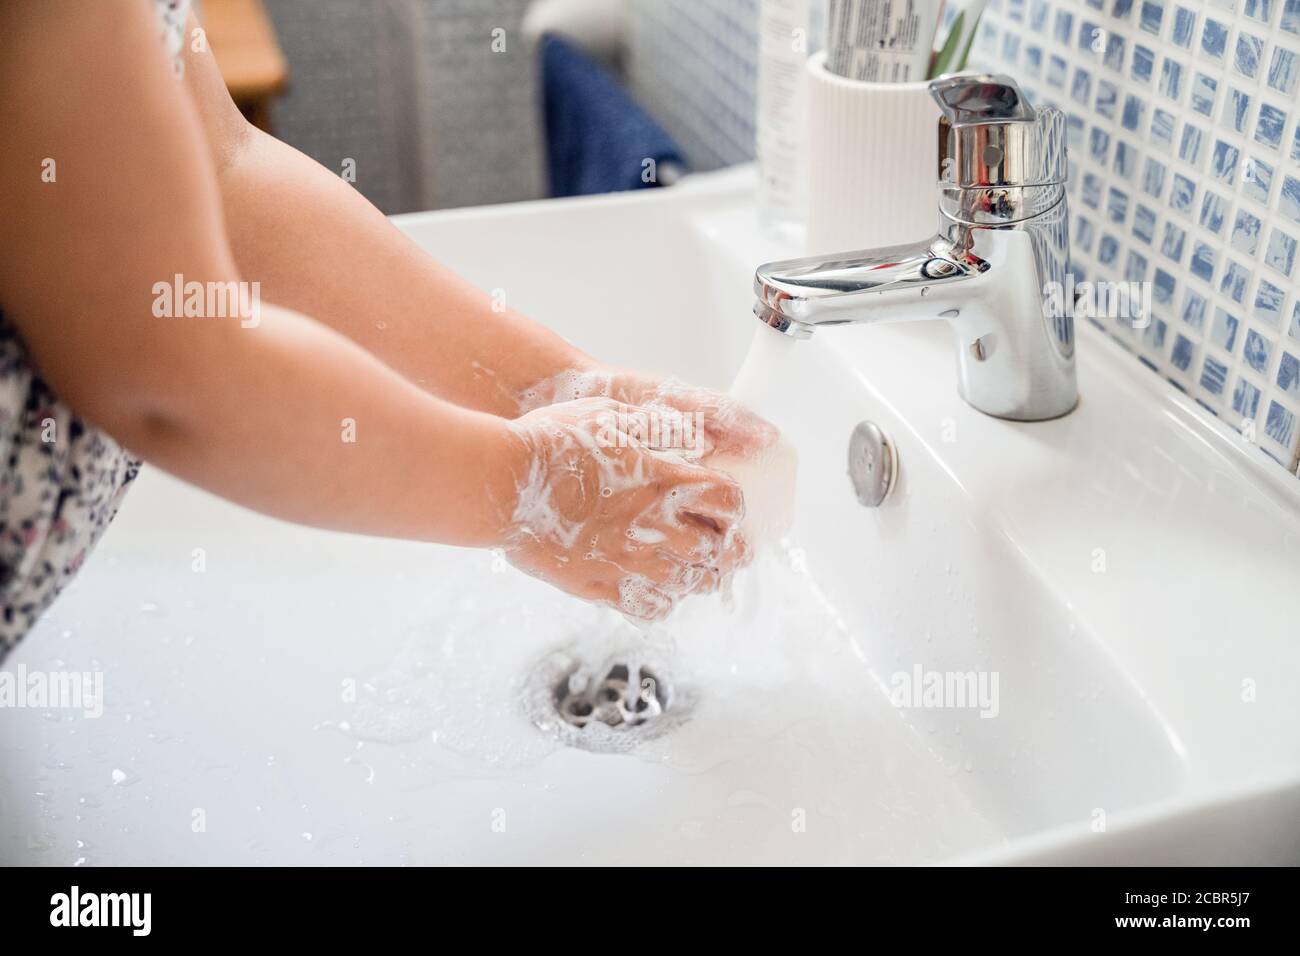 Little girl washes hands with bar of soap in washbasin under running tap water Stock Photo